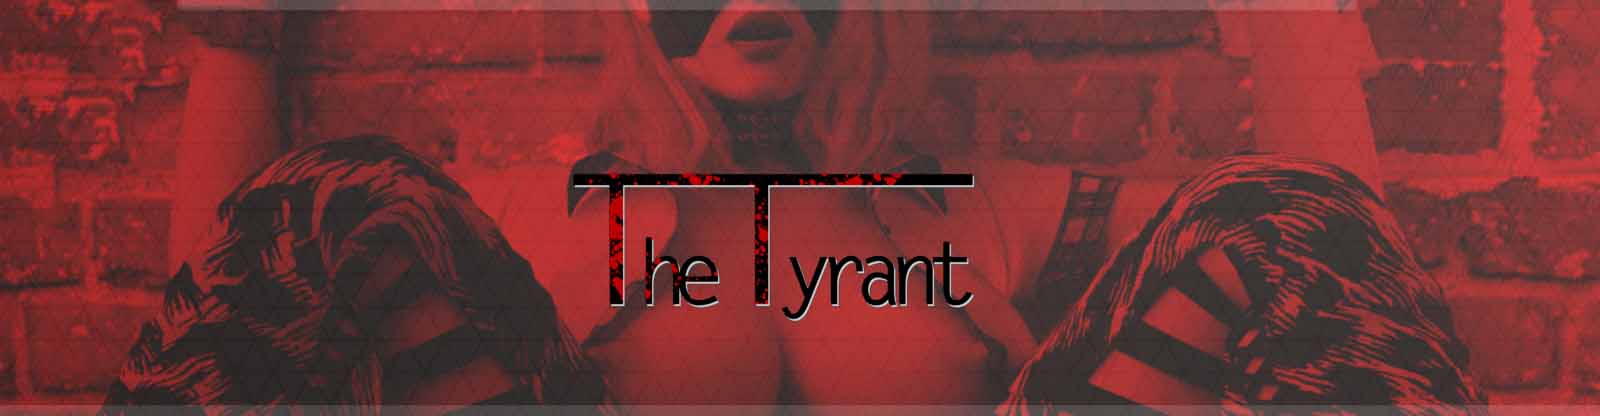 The Tyrant 3d sex game, porn game, adult game